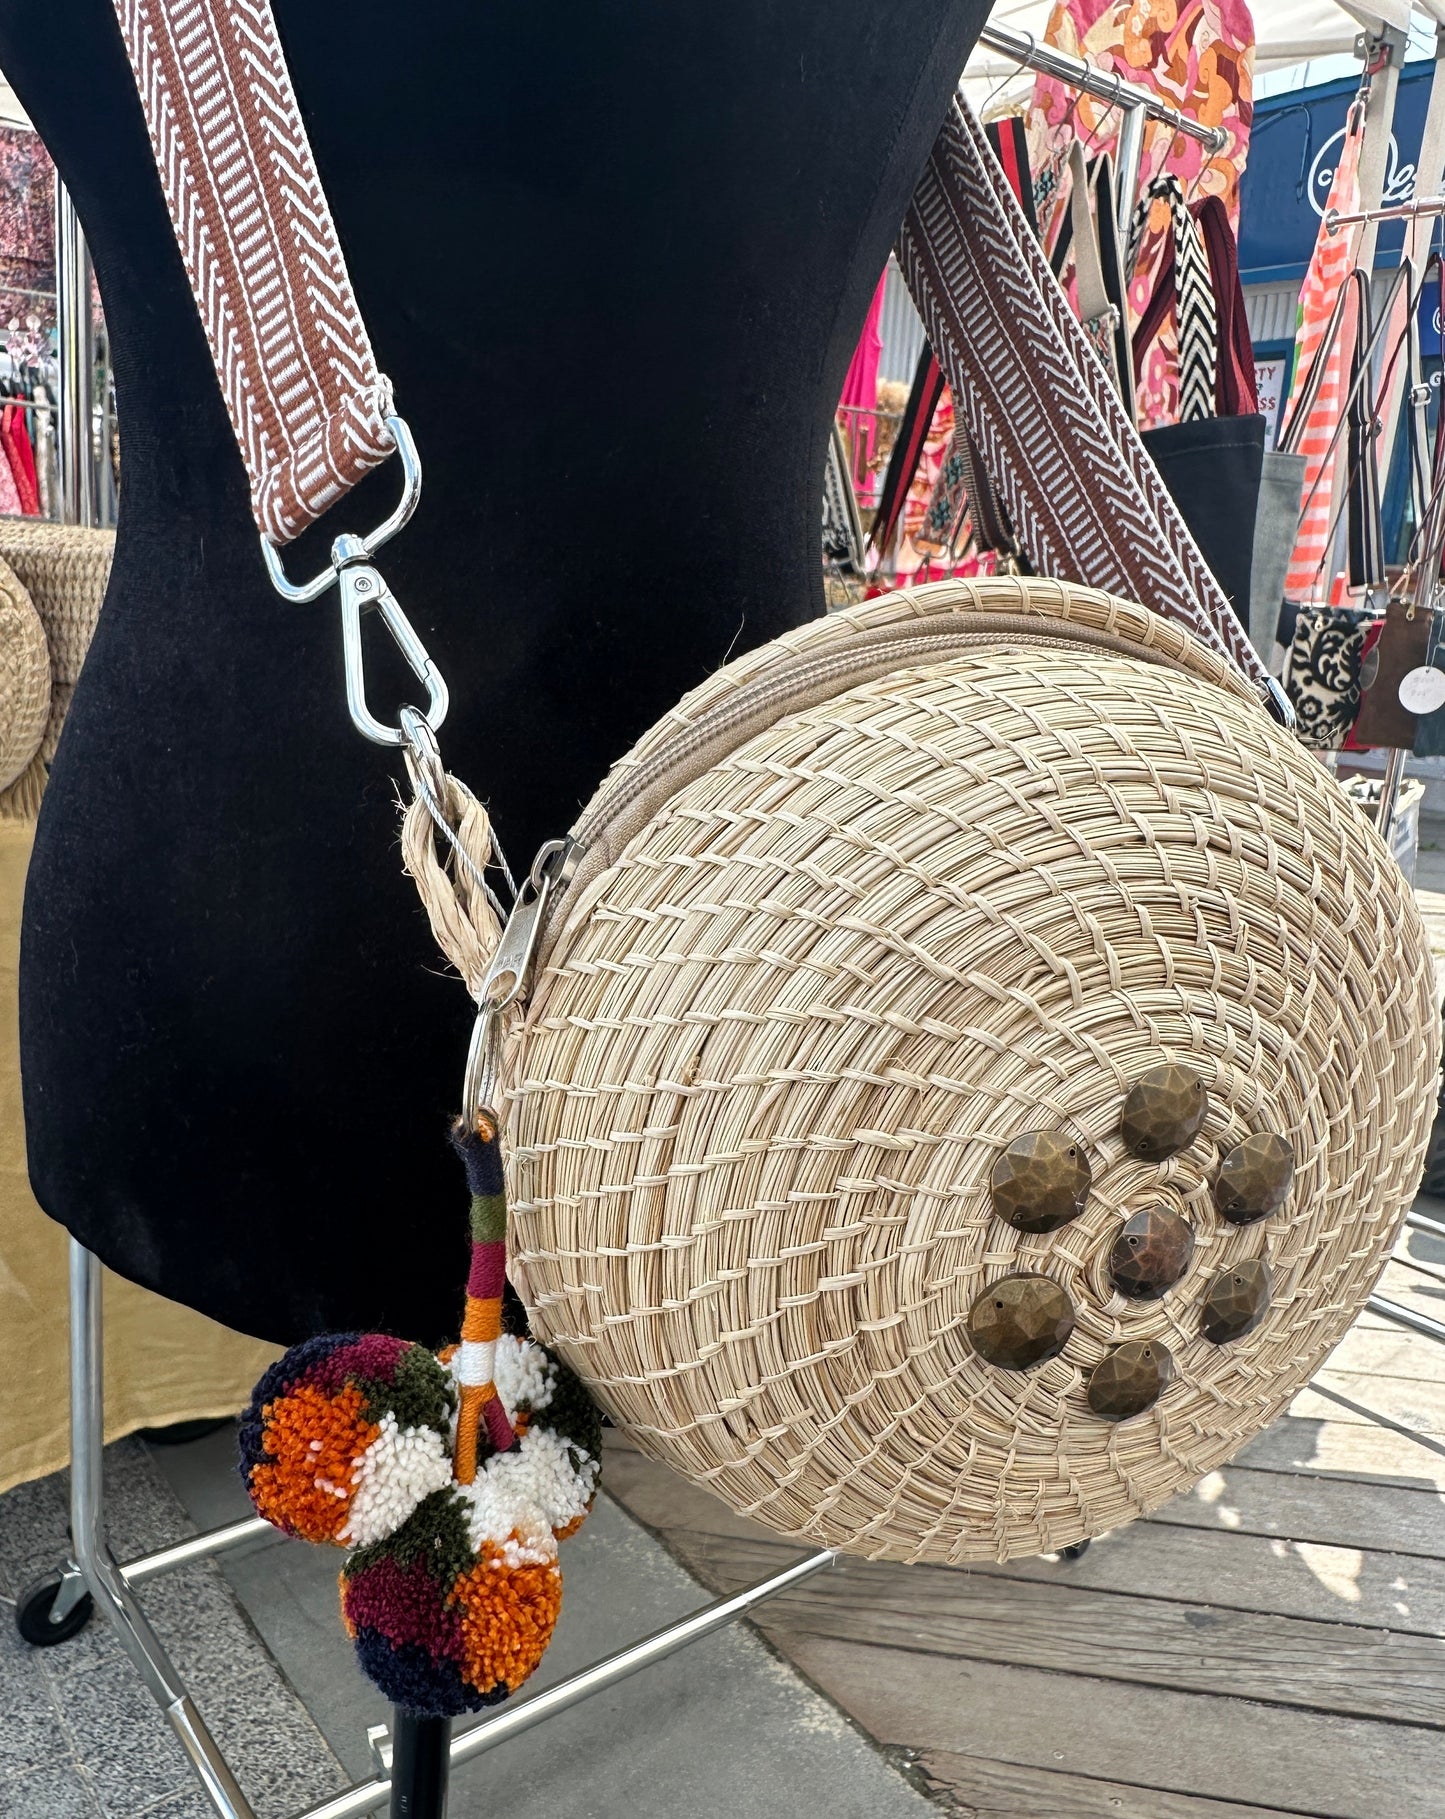 One of a kind straw crossbody bag with studs and pom poms.